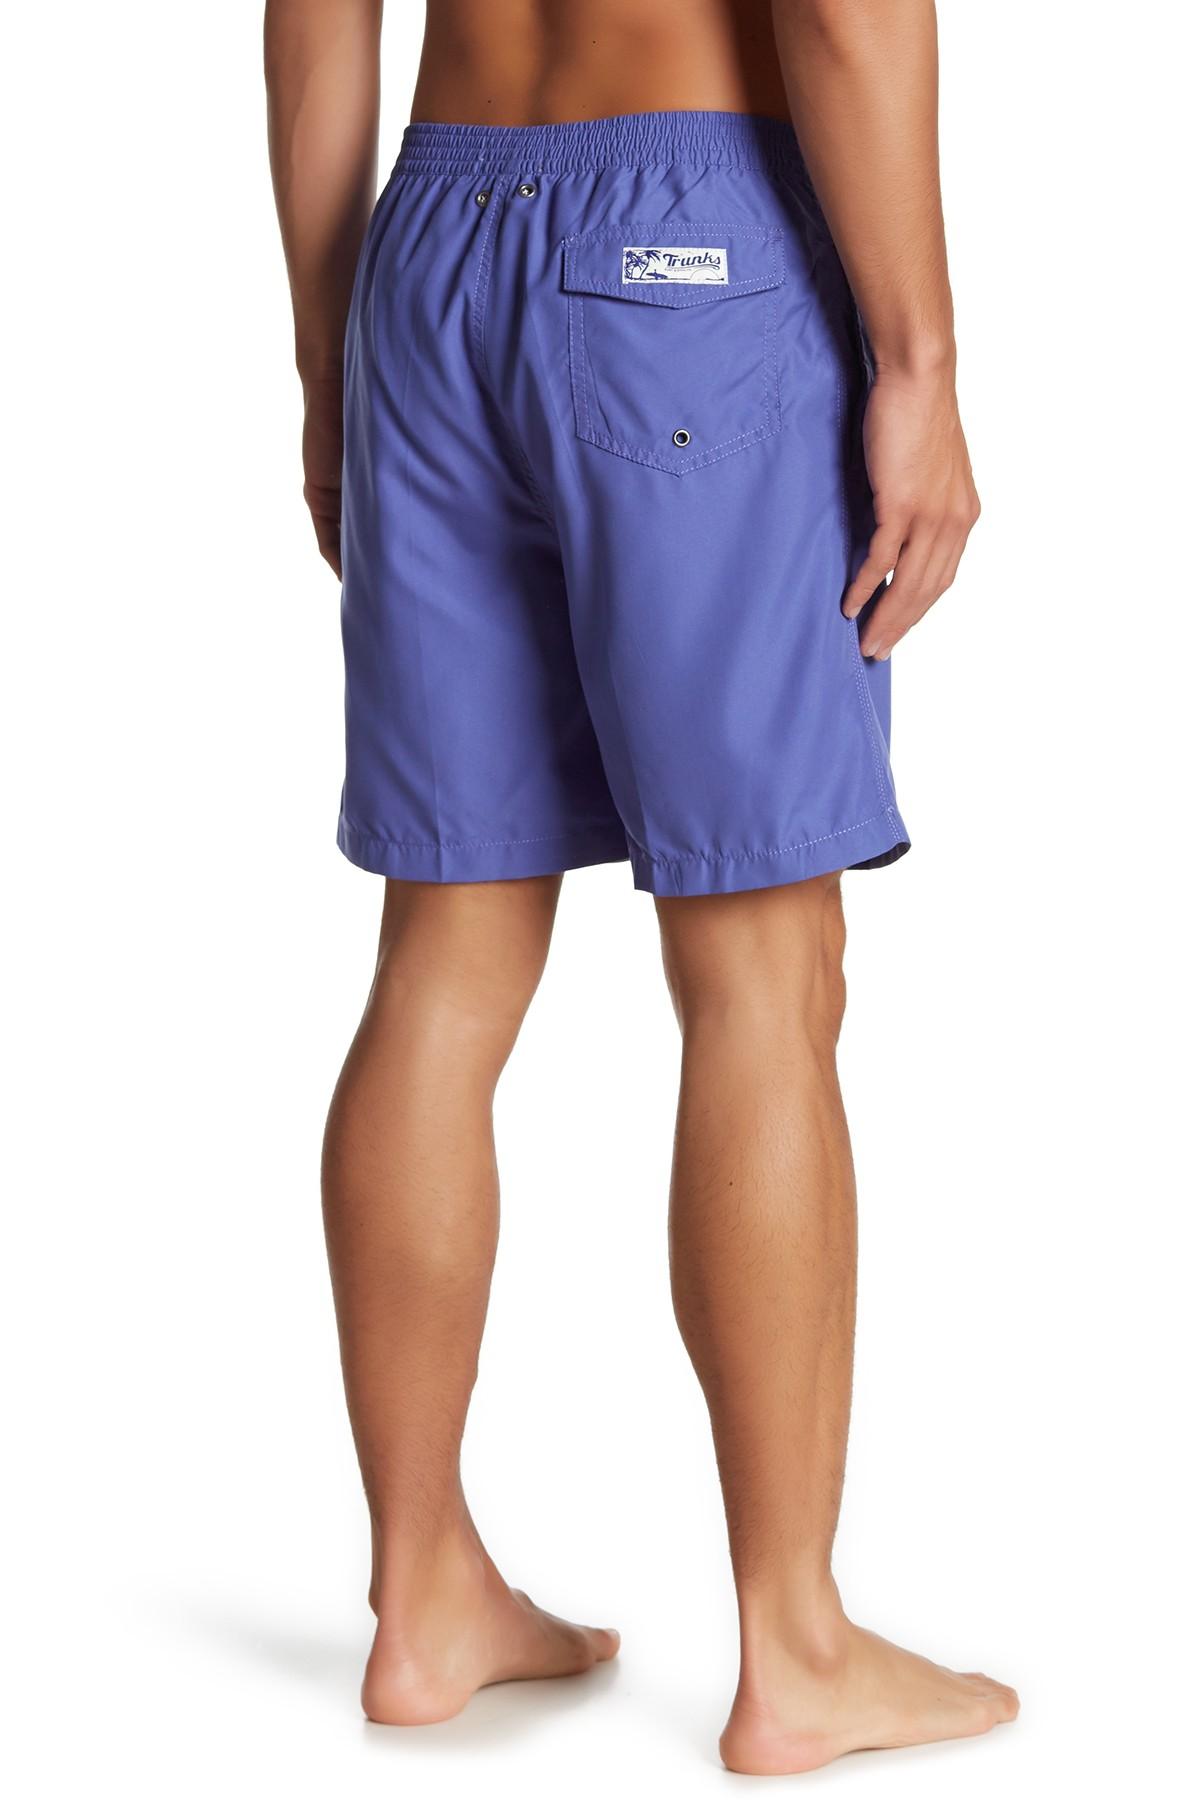 TRUNKS SURF AND SWIM CO Swami Lace-up Swim Shorts in Blue for Men - Lyst